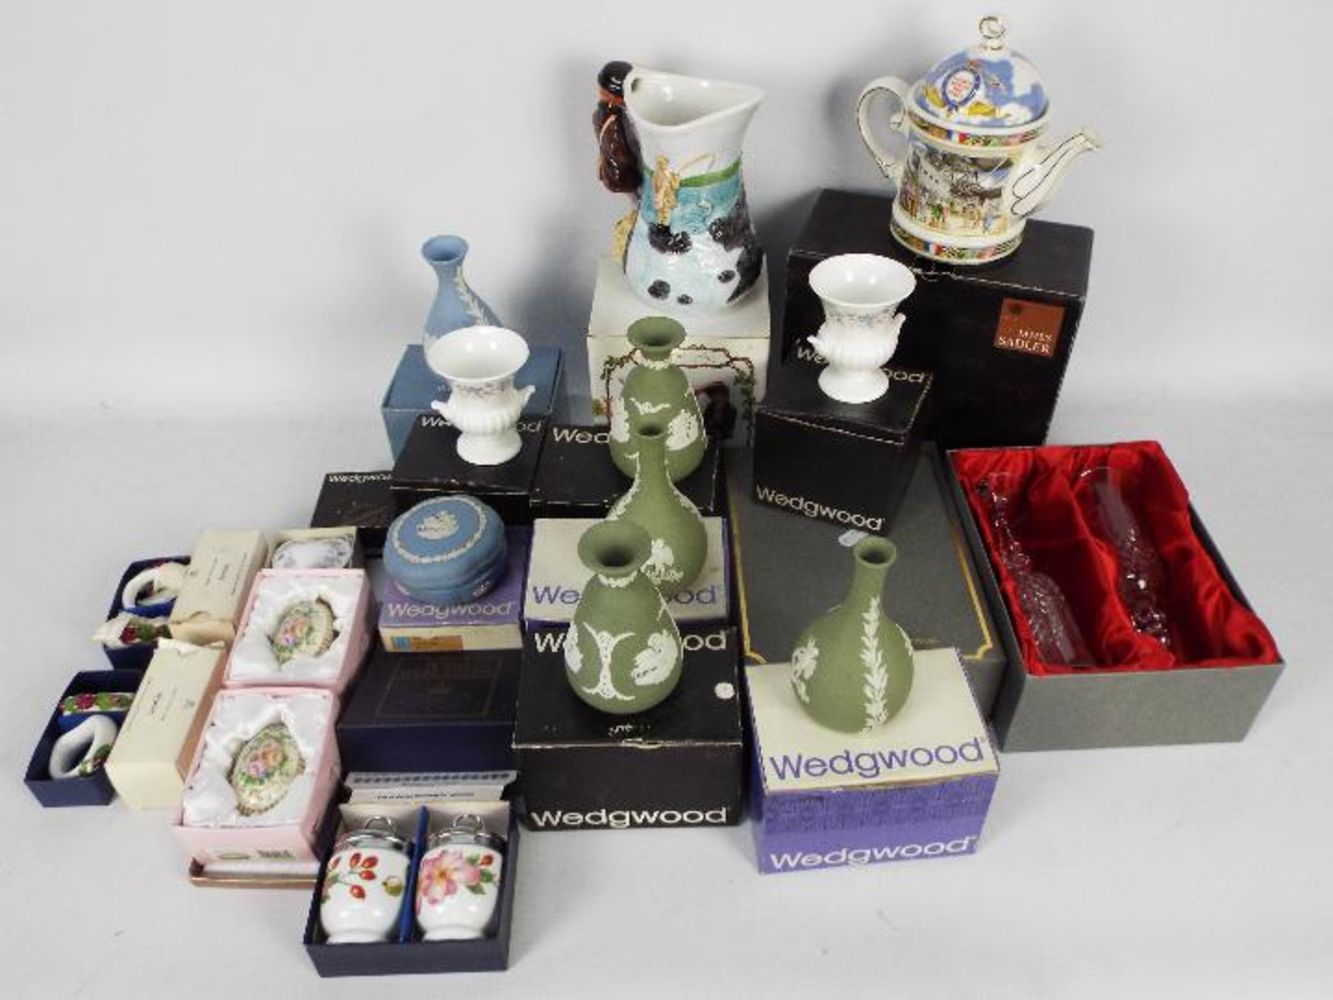 Pre-Owned Household Goods, Furniture, Ceramics, Collectables, Liquidated Retail Stock